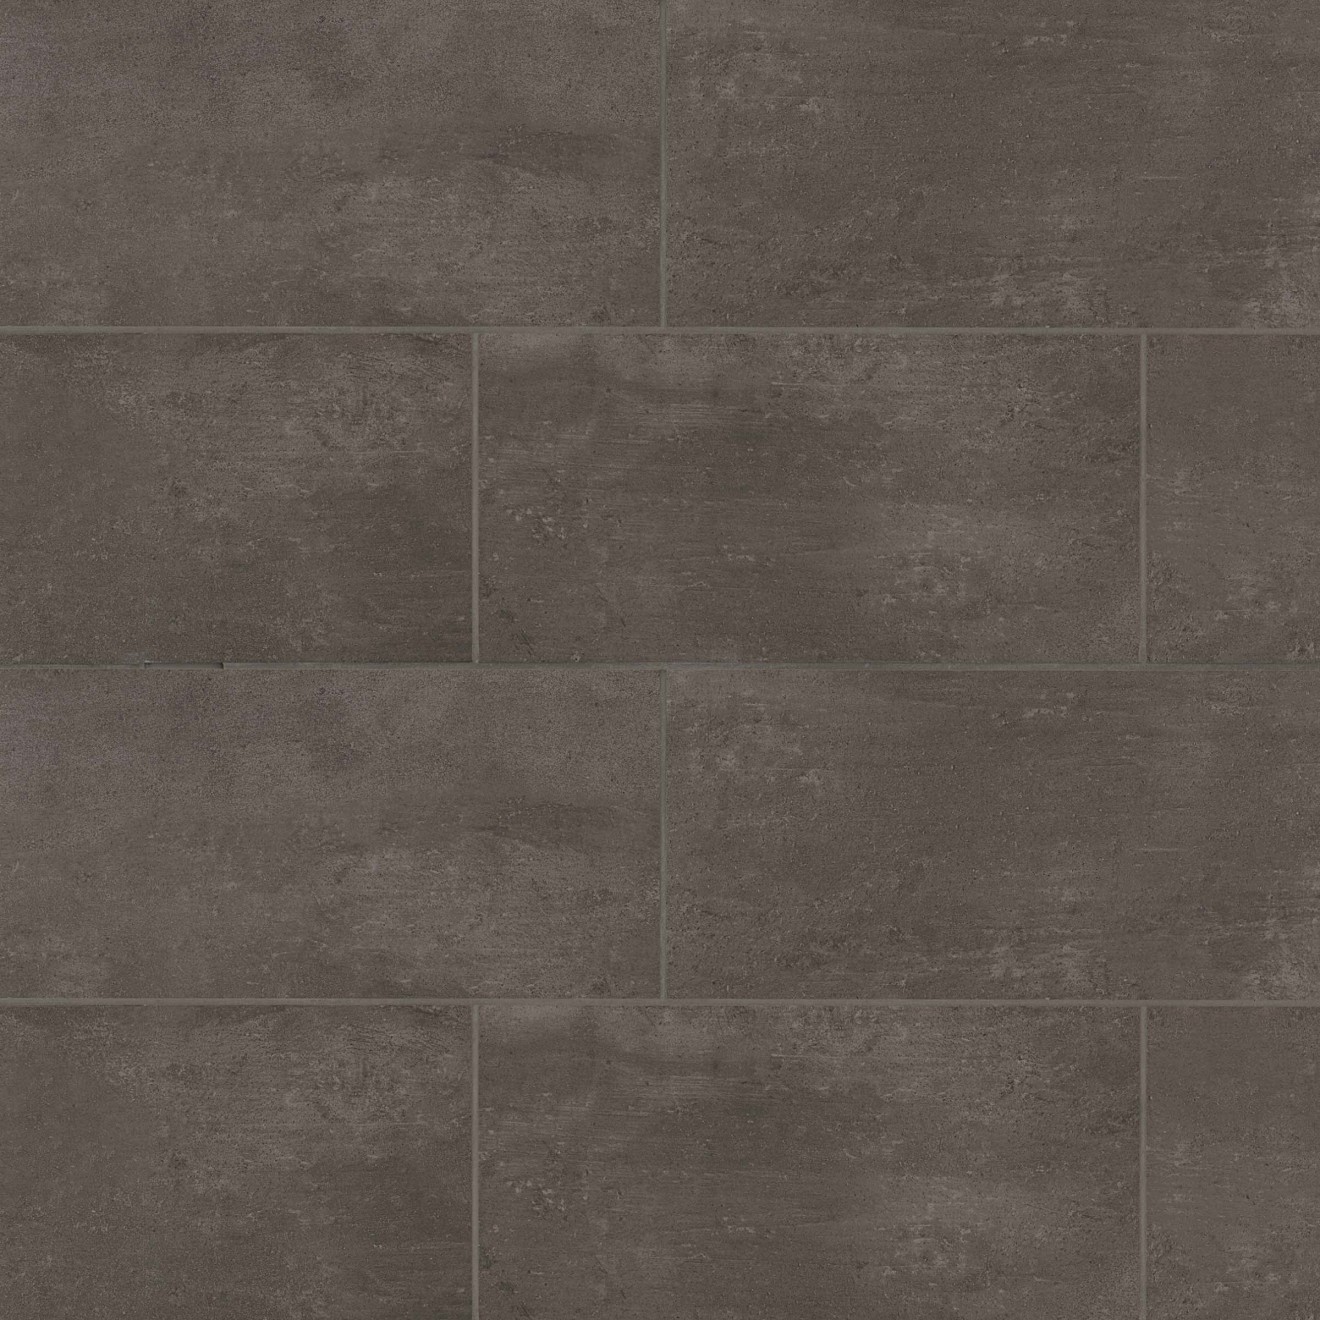 SIMPLY COFFEE - SIMPLY MODERN Collection - Concrete Tile Look